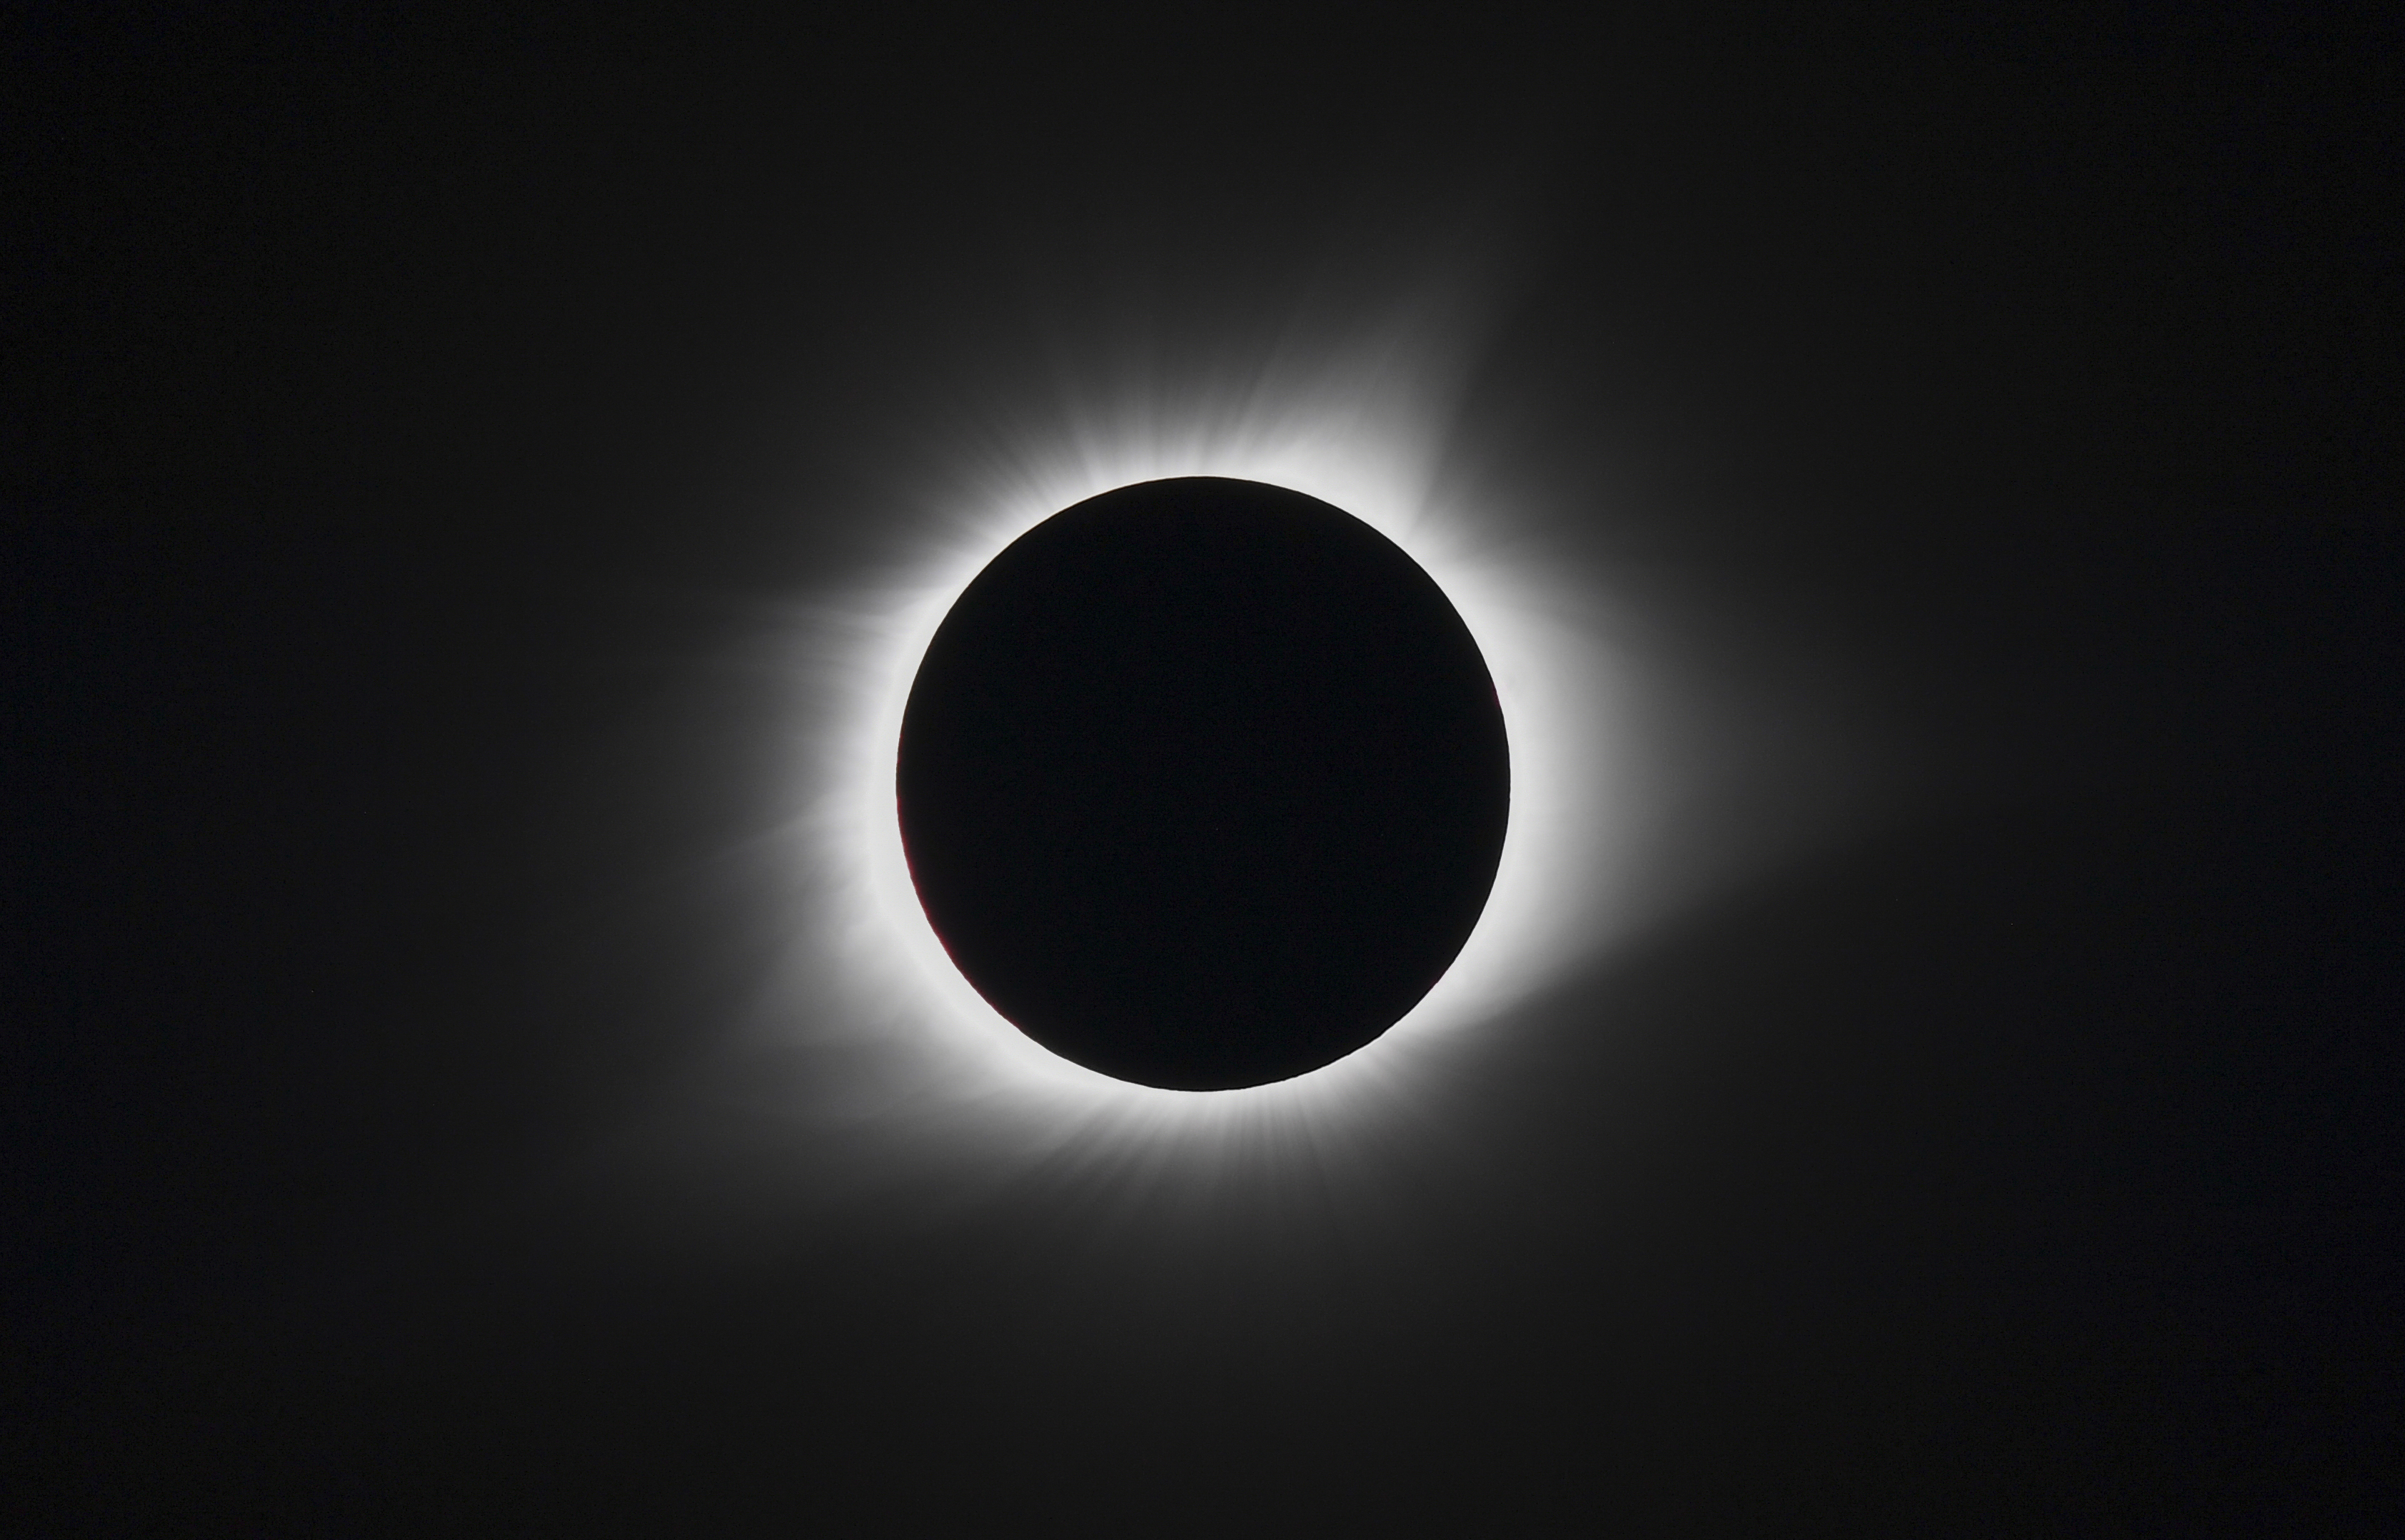 Solar eclipse with the moon blocking the sun&#x27;s center, creating a glowing halo